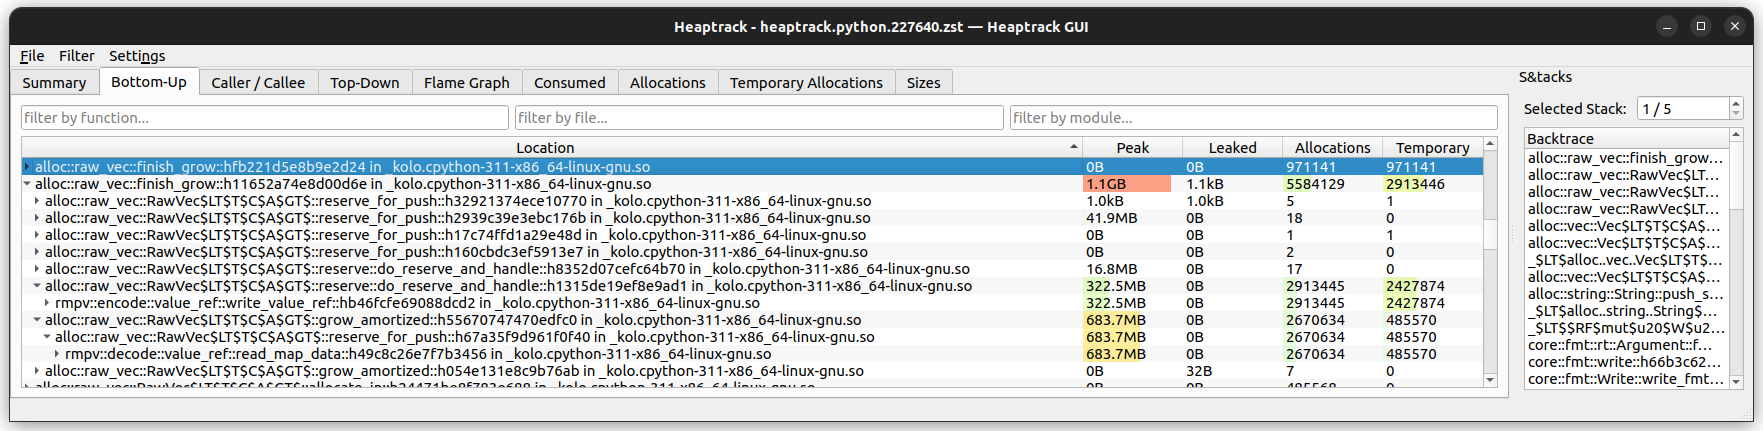 heaptrack's Bottom-Up view showing 683MB used to decode map data in ValueRef and 322MB in write_value_ref.